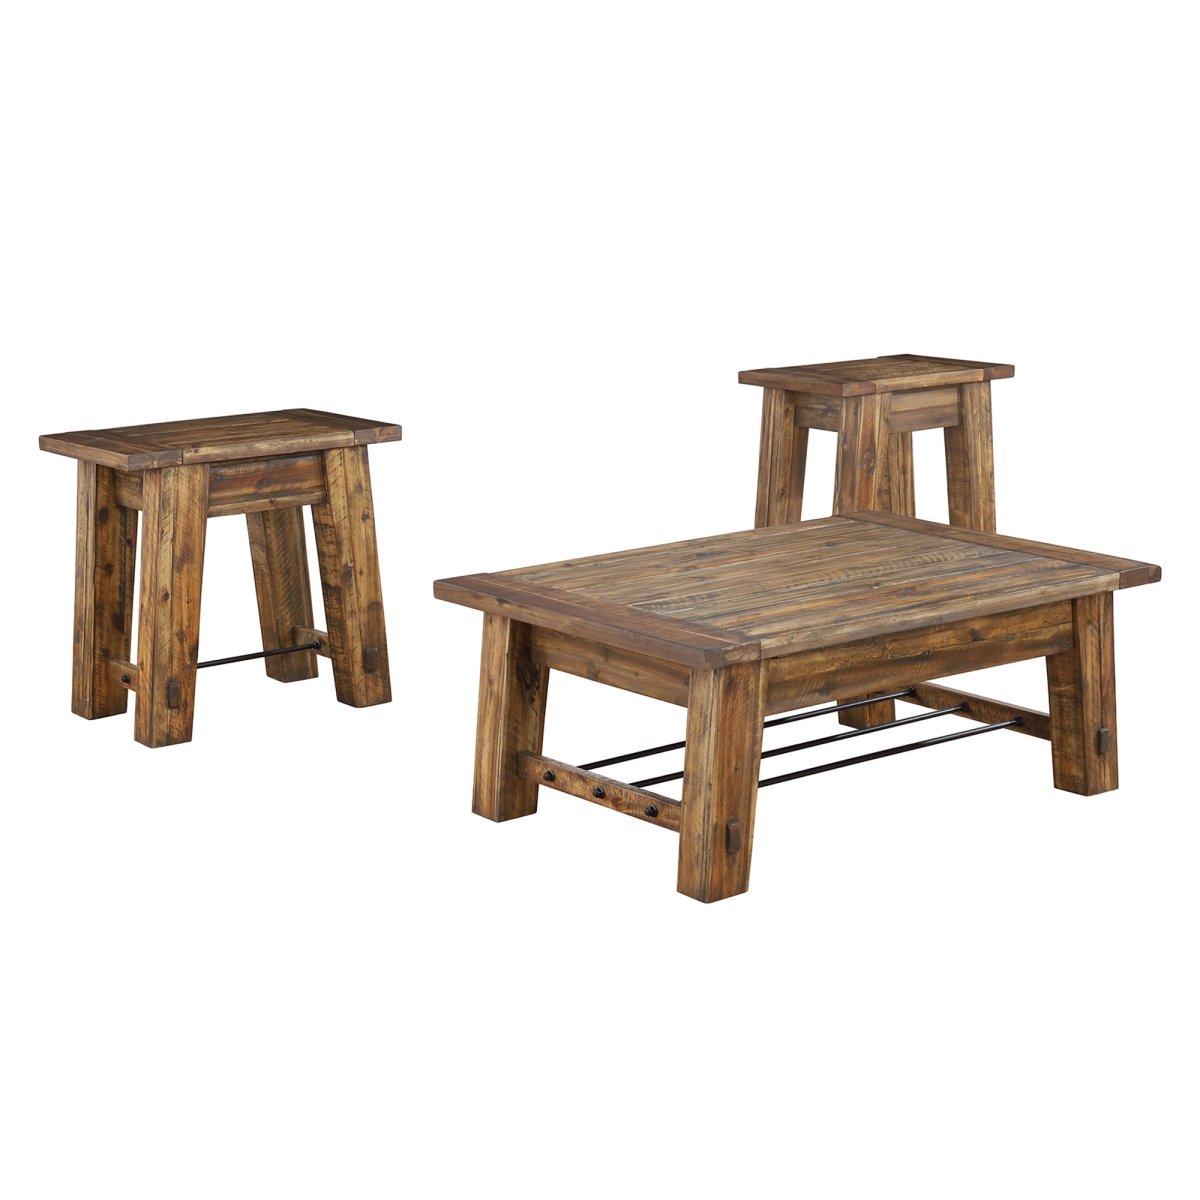 Picture of Alaterre ANDU011274 Durango Industrial Wood 48 in. Coffee Table & 27 in. End Table